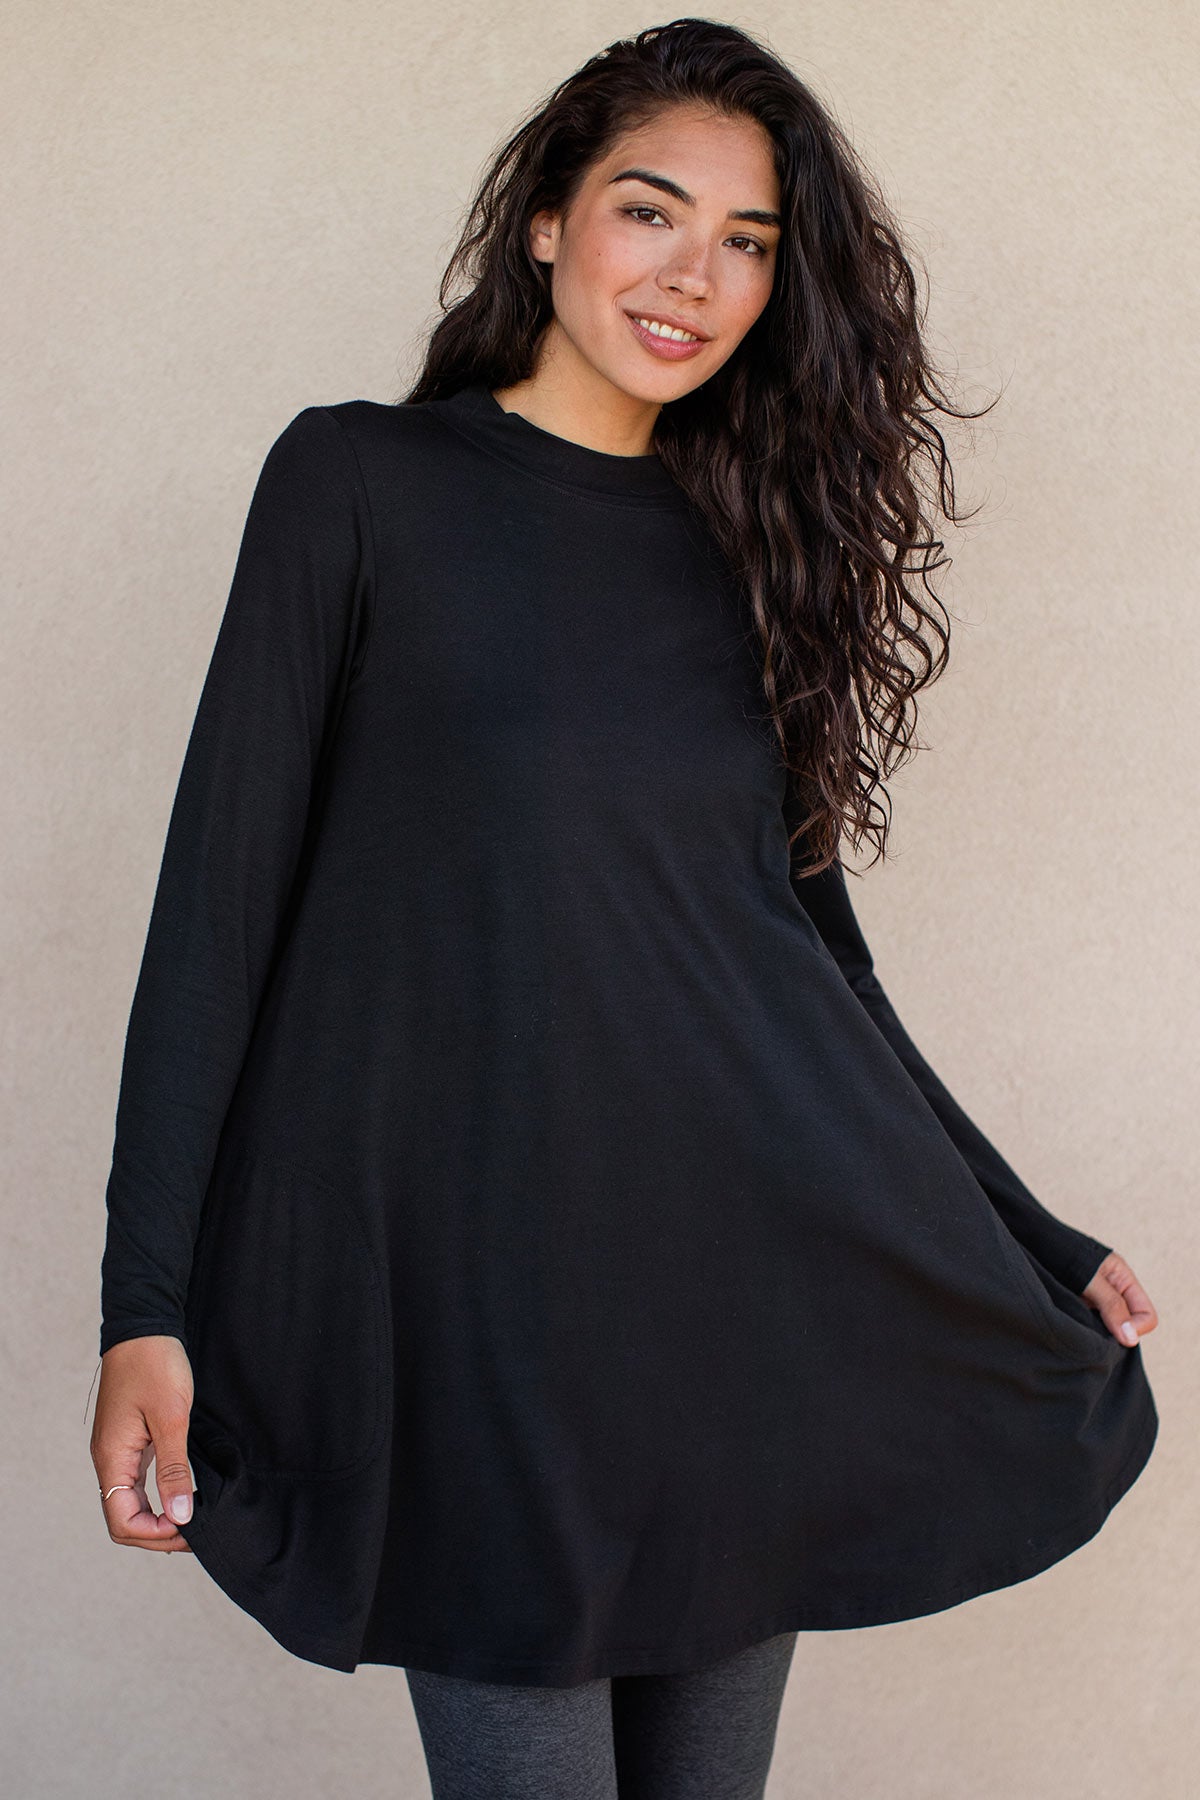 A woman standing and smiling while holding out the edges of her dress, wearing Yala Cadence Mock Neck Bamboo Swing Dress in Black